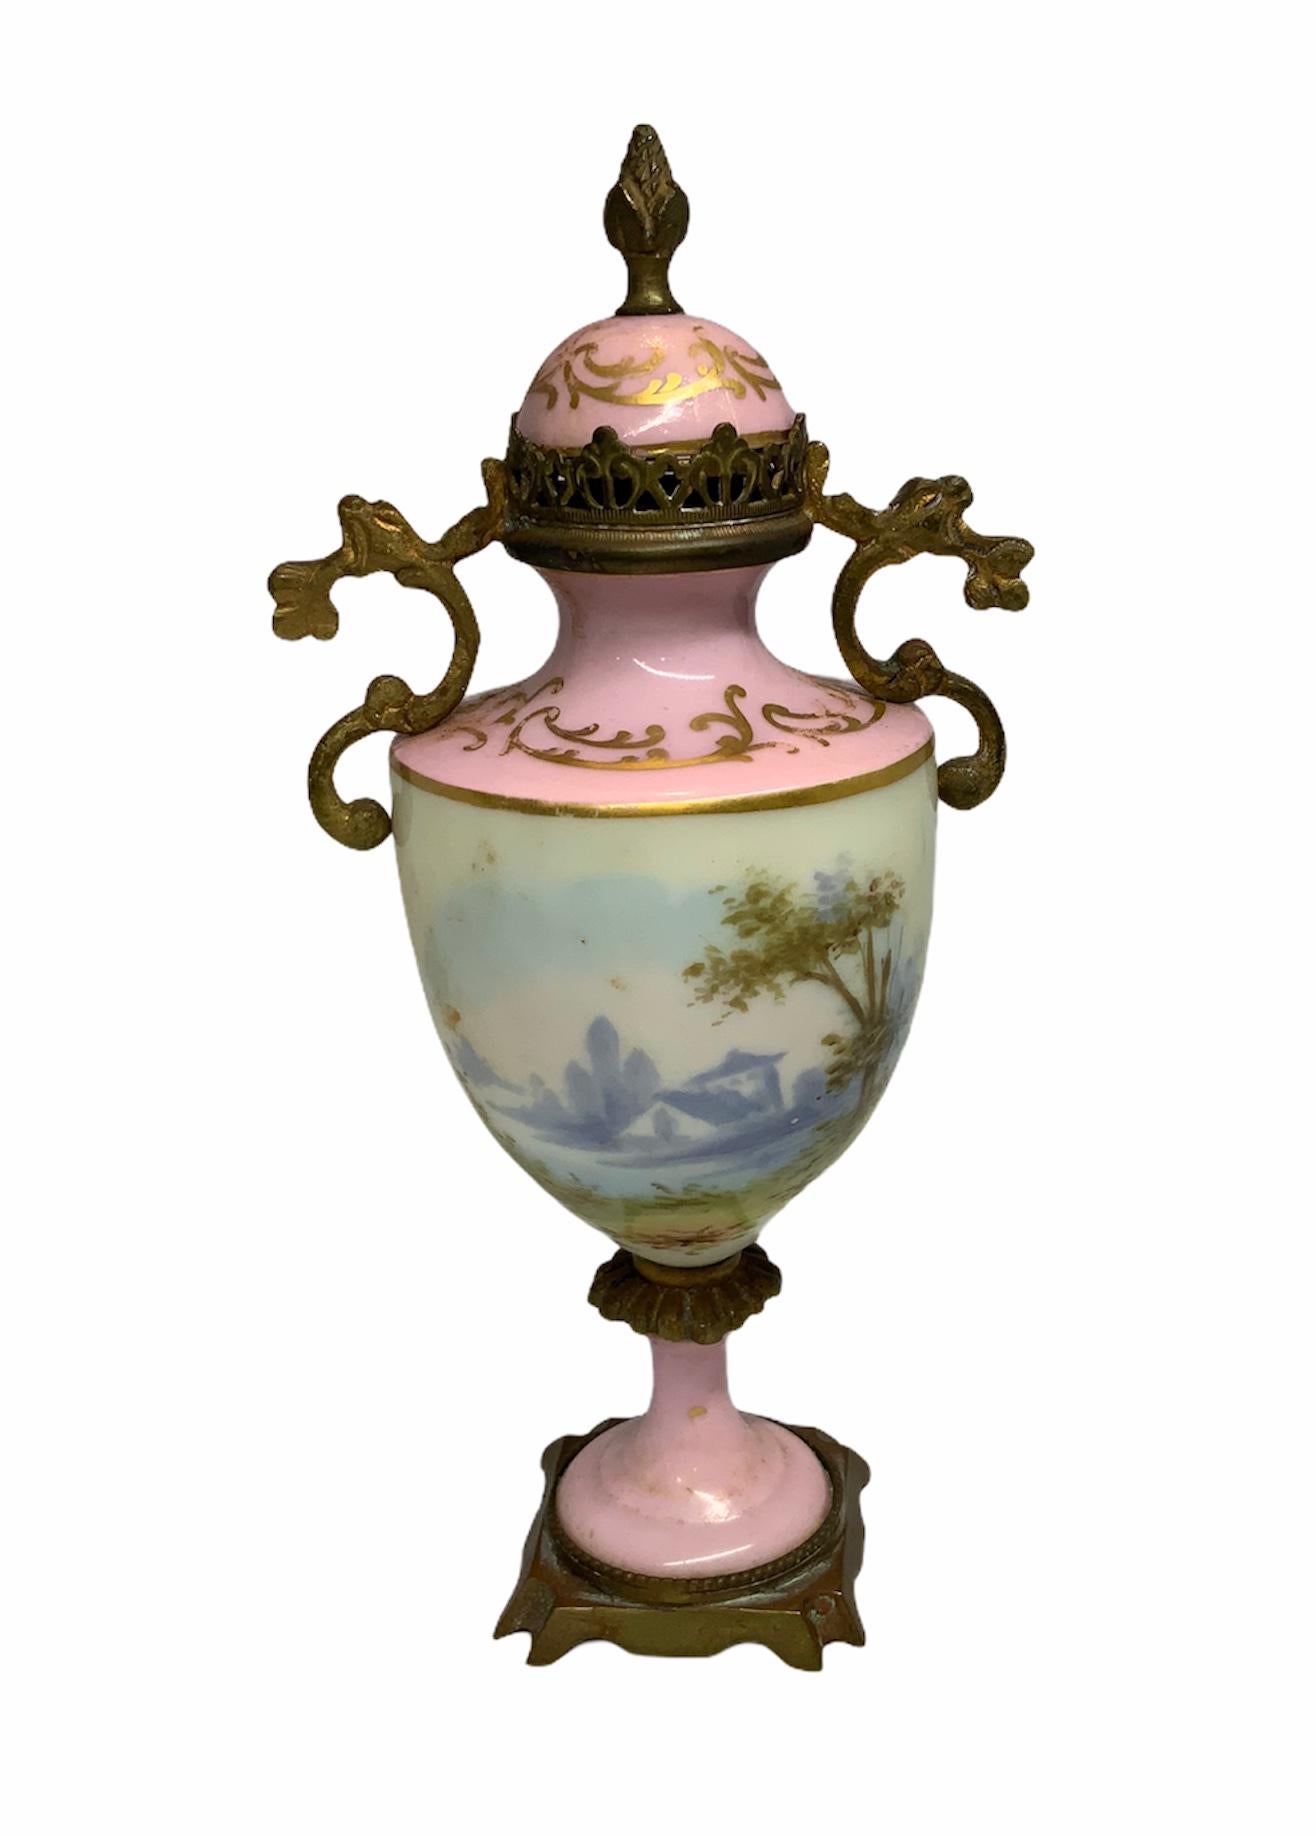 This is a very old gilt and pale pink background urn depicting a continuous hand-painted scene of a lady sitting in a pastoral landscape holding her fan and observing nature. In the back there is a scene of a lake in front of a country house. The